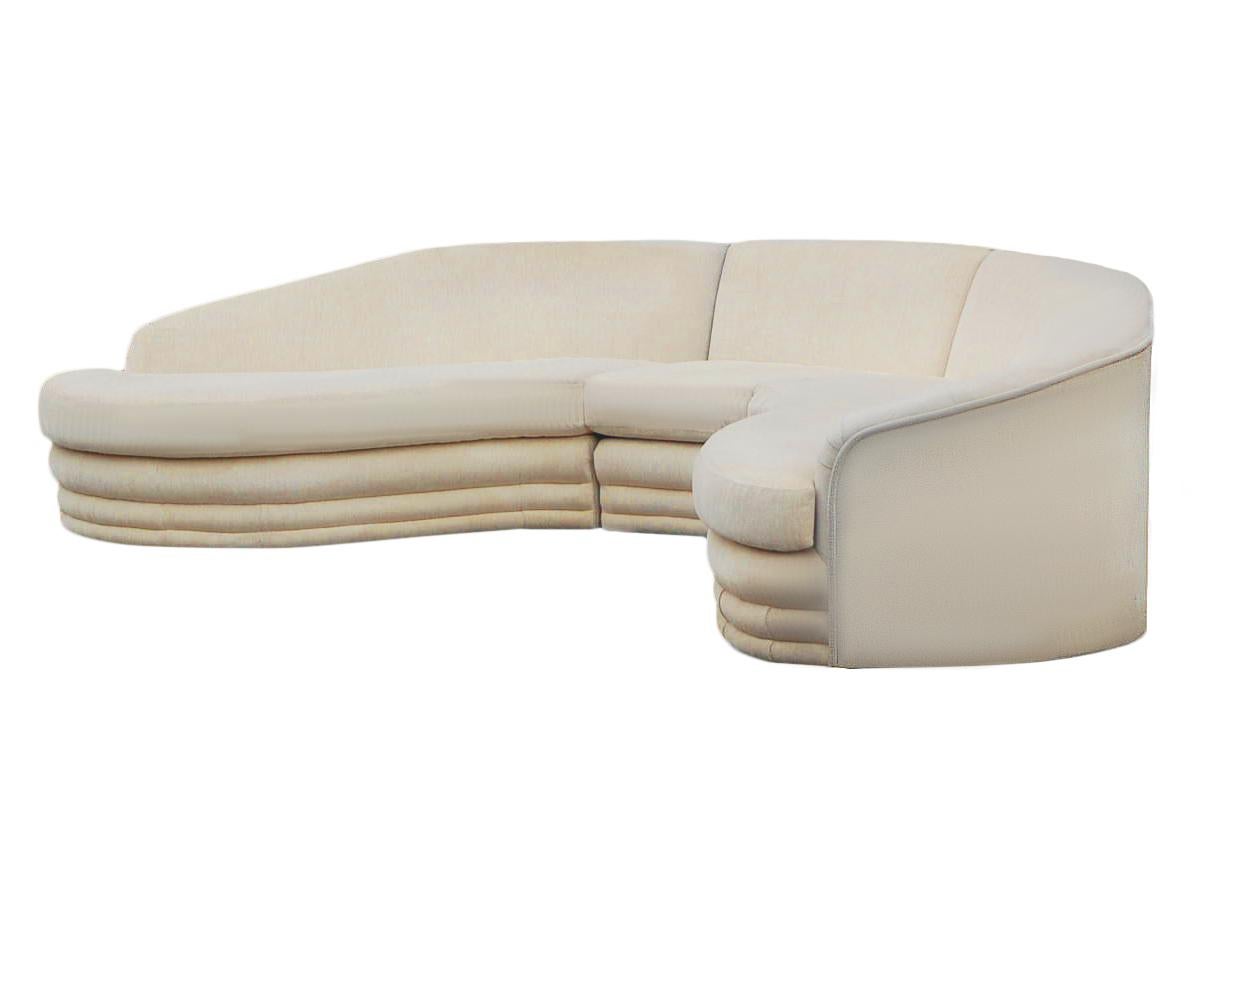 A stunning 3-piece semi-circular sofa, circa 1970s. This sofa can be used with 2 or 3 sections. It is well made and still retains its original off-white velour upholstery.